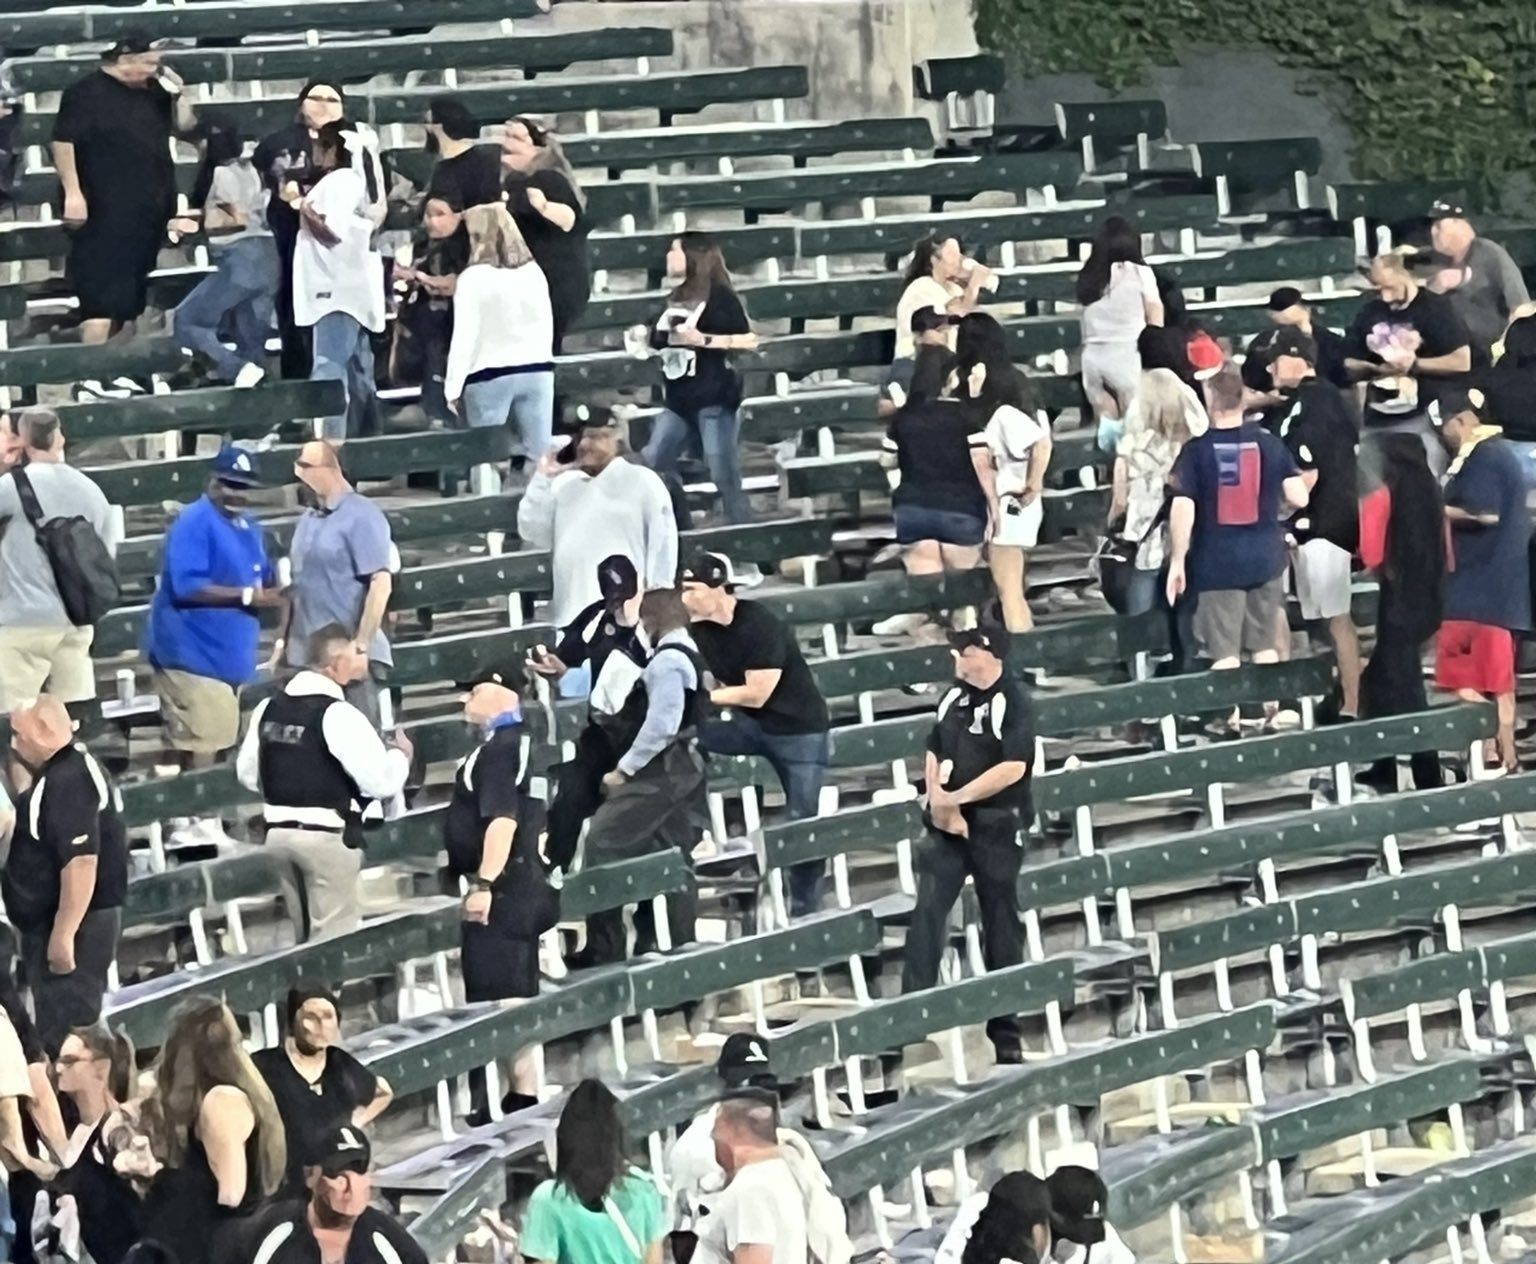 Three people shot at Chicago’s Guaranteed Rate Field during a White Sox game